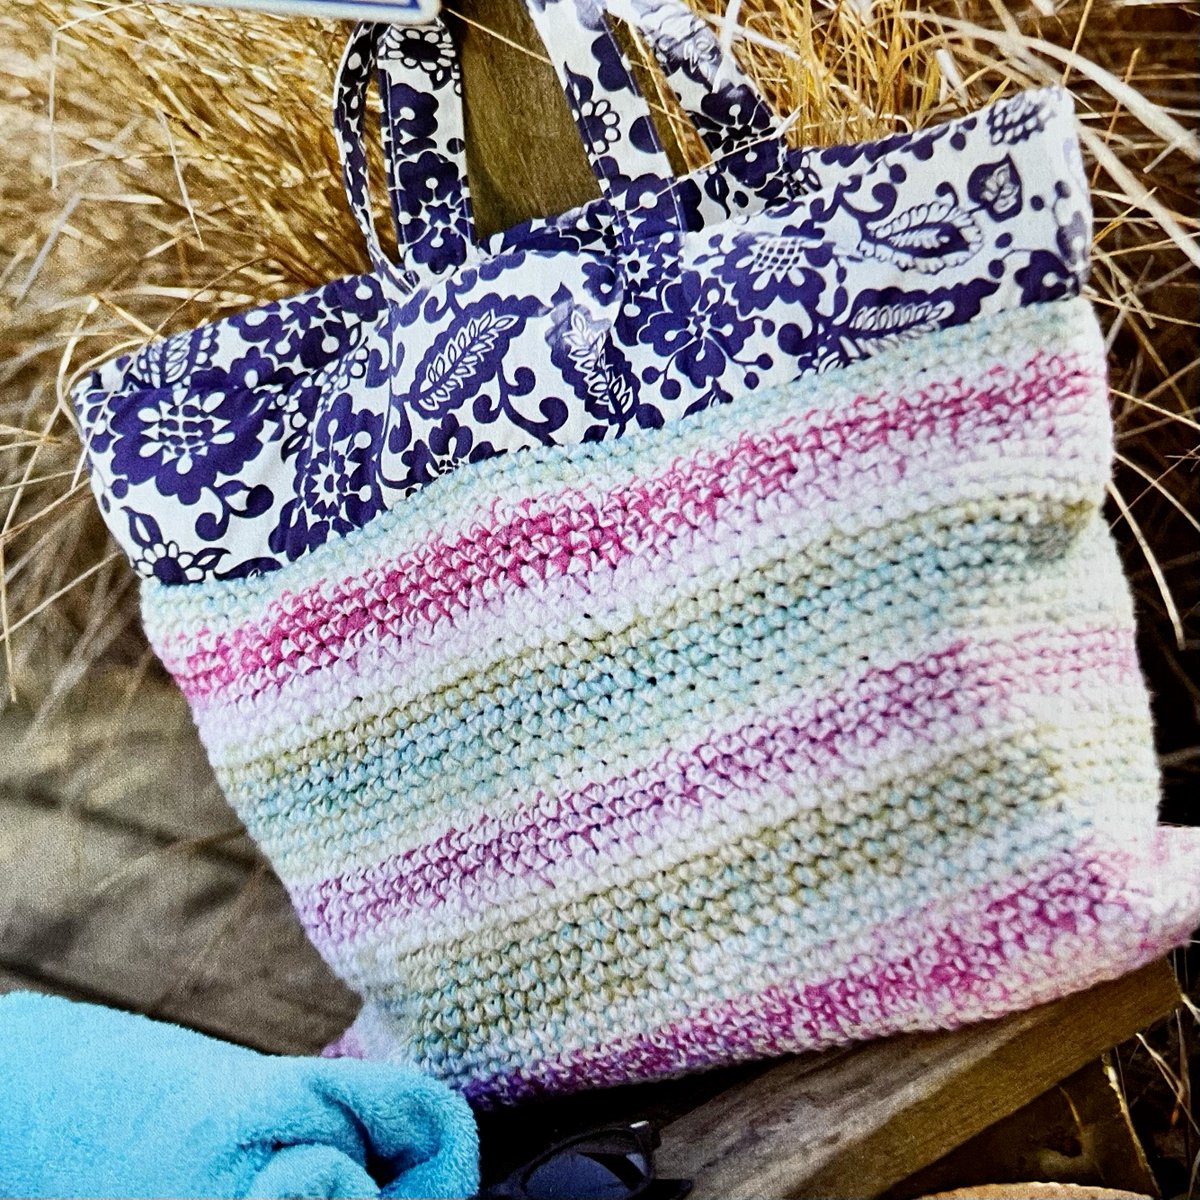 Excited to share the latest addition to my #etsyshop: Crochet Supersize Bag Crochet Pattern  etsy.me/3QTiJfW #sewing #crochet #crochetpattern #oversizedbag #beachbag #chunkybag #variegated #supersizebag #bagpattern #MHHSBD #EarlyBiz #sbs